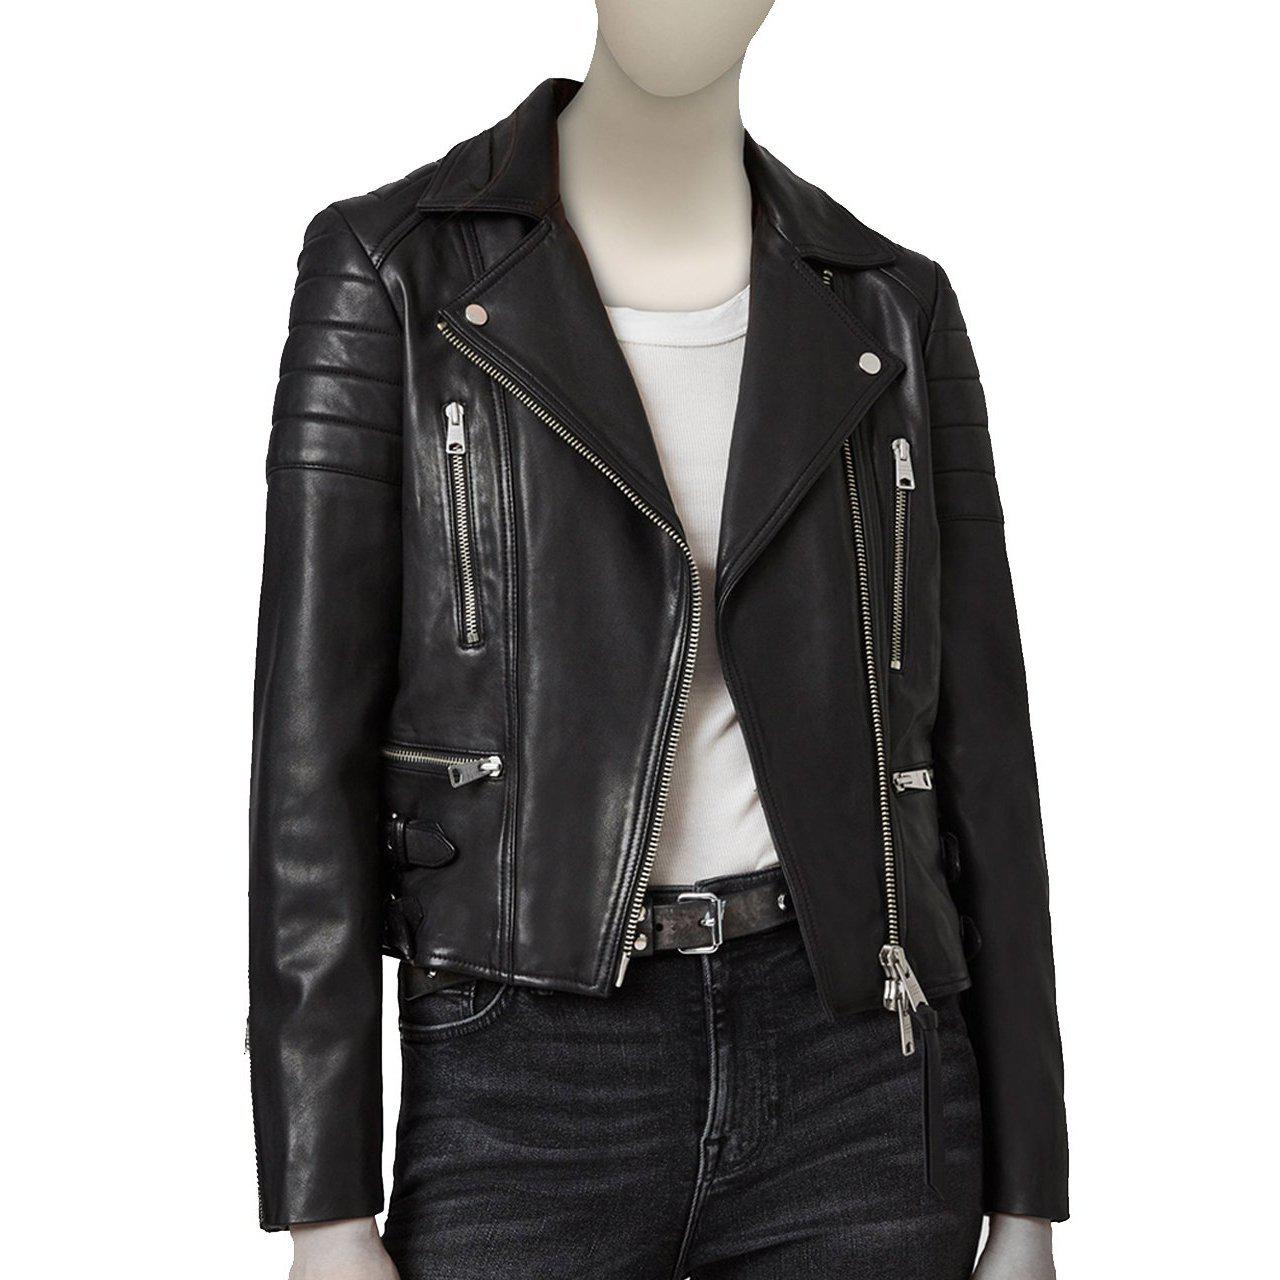 BIKER LEATHER JACKET WITH LINING ON SLEEVES FOR WOMEN - Leather Jacket